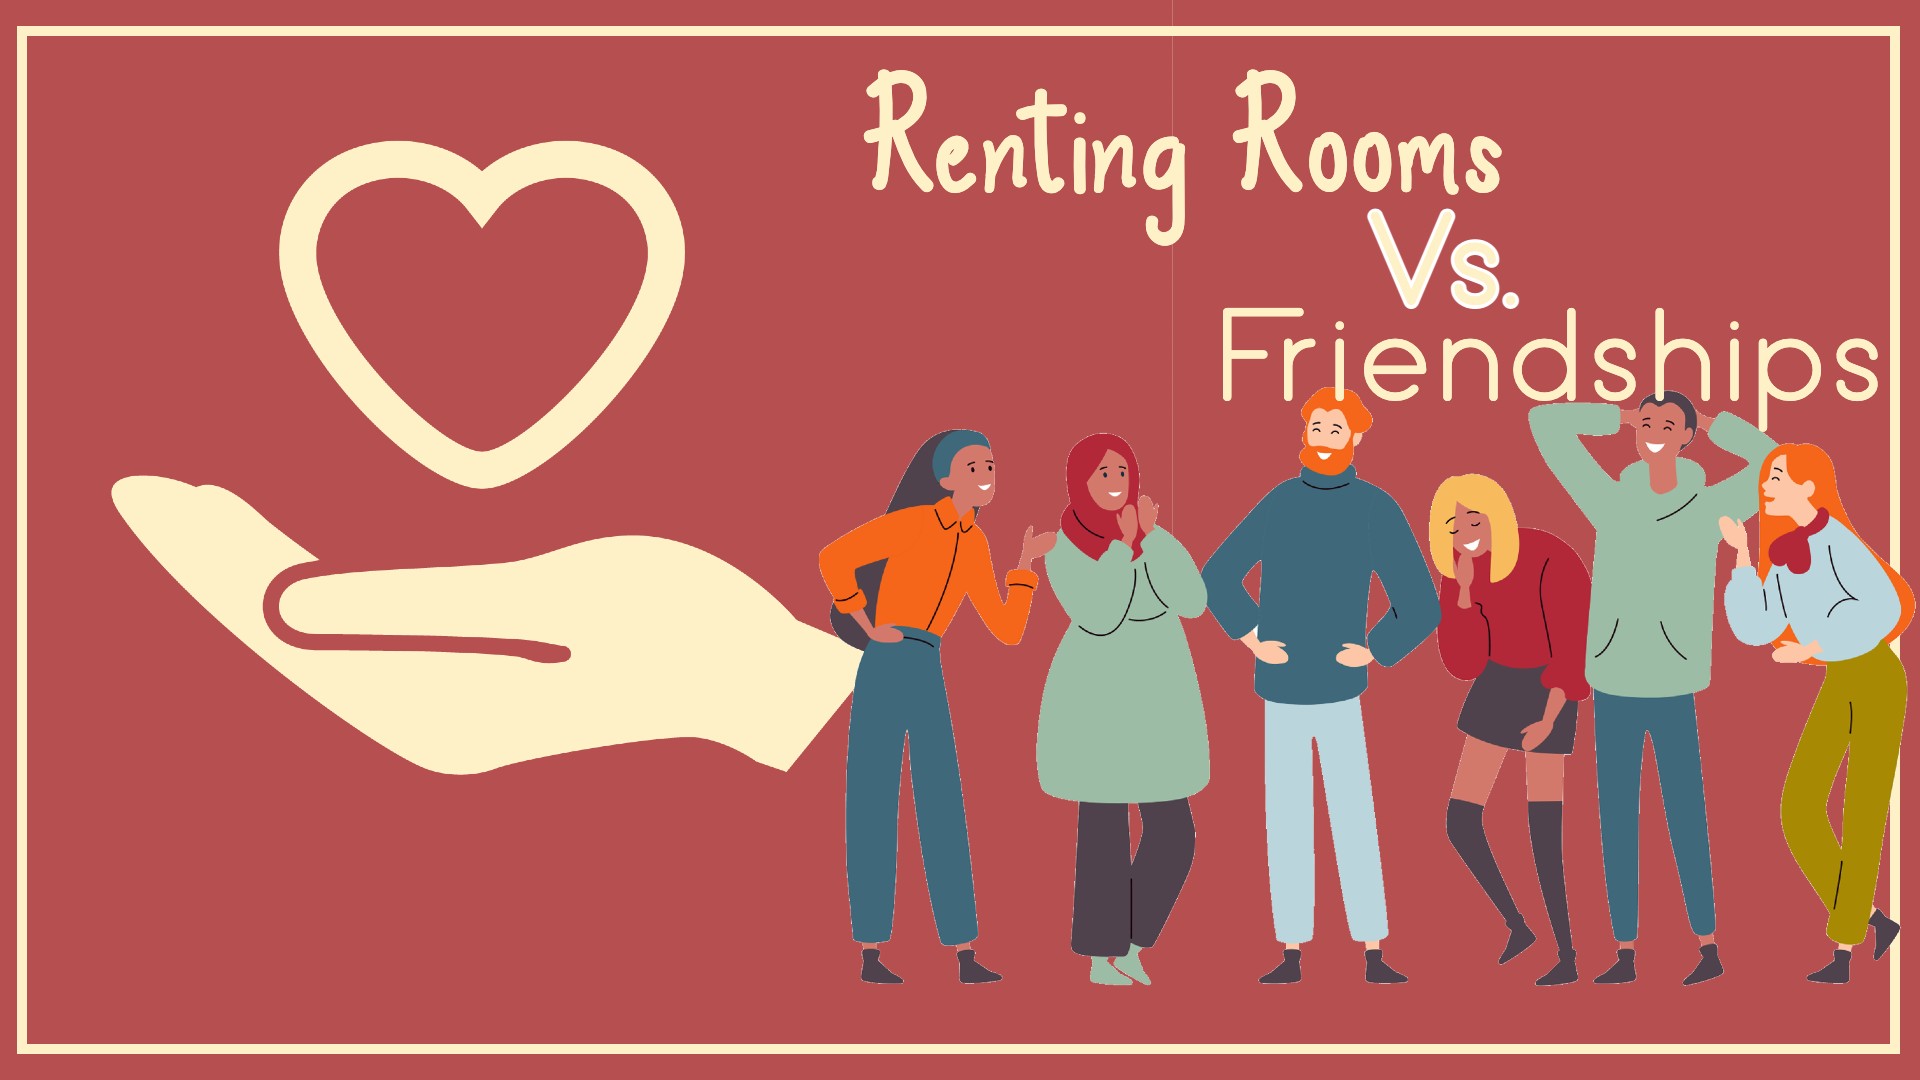 Renting Rooms vs. Friendships